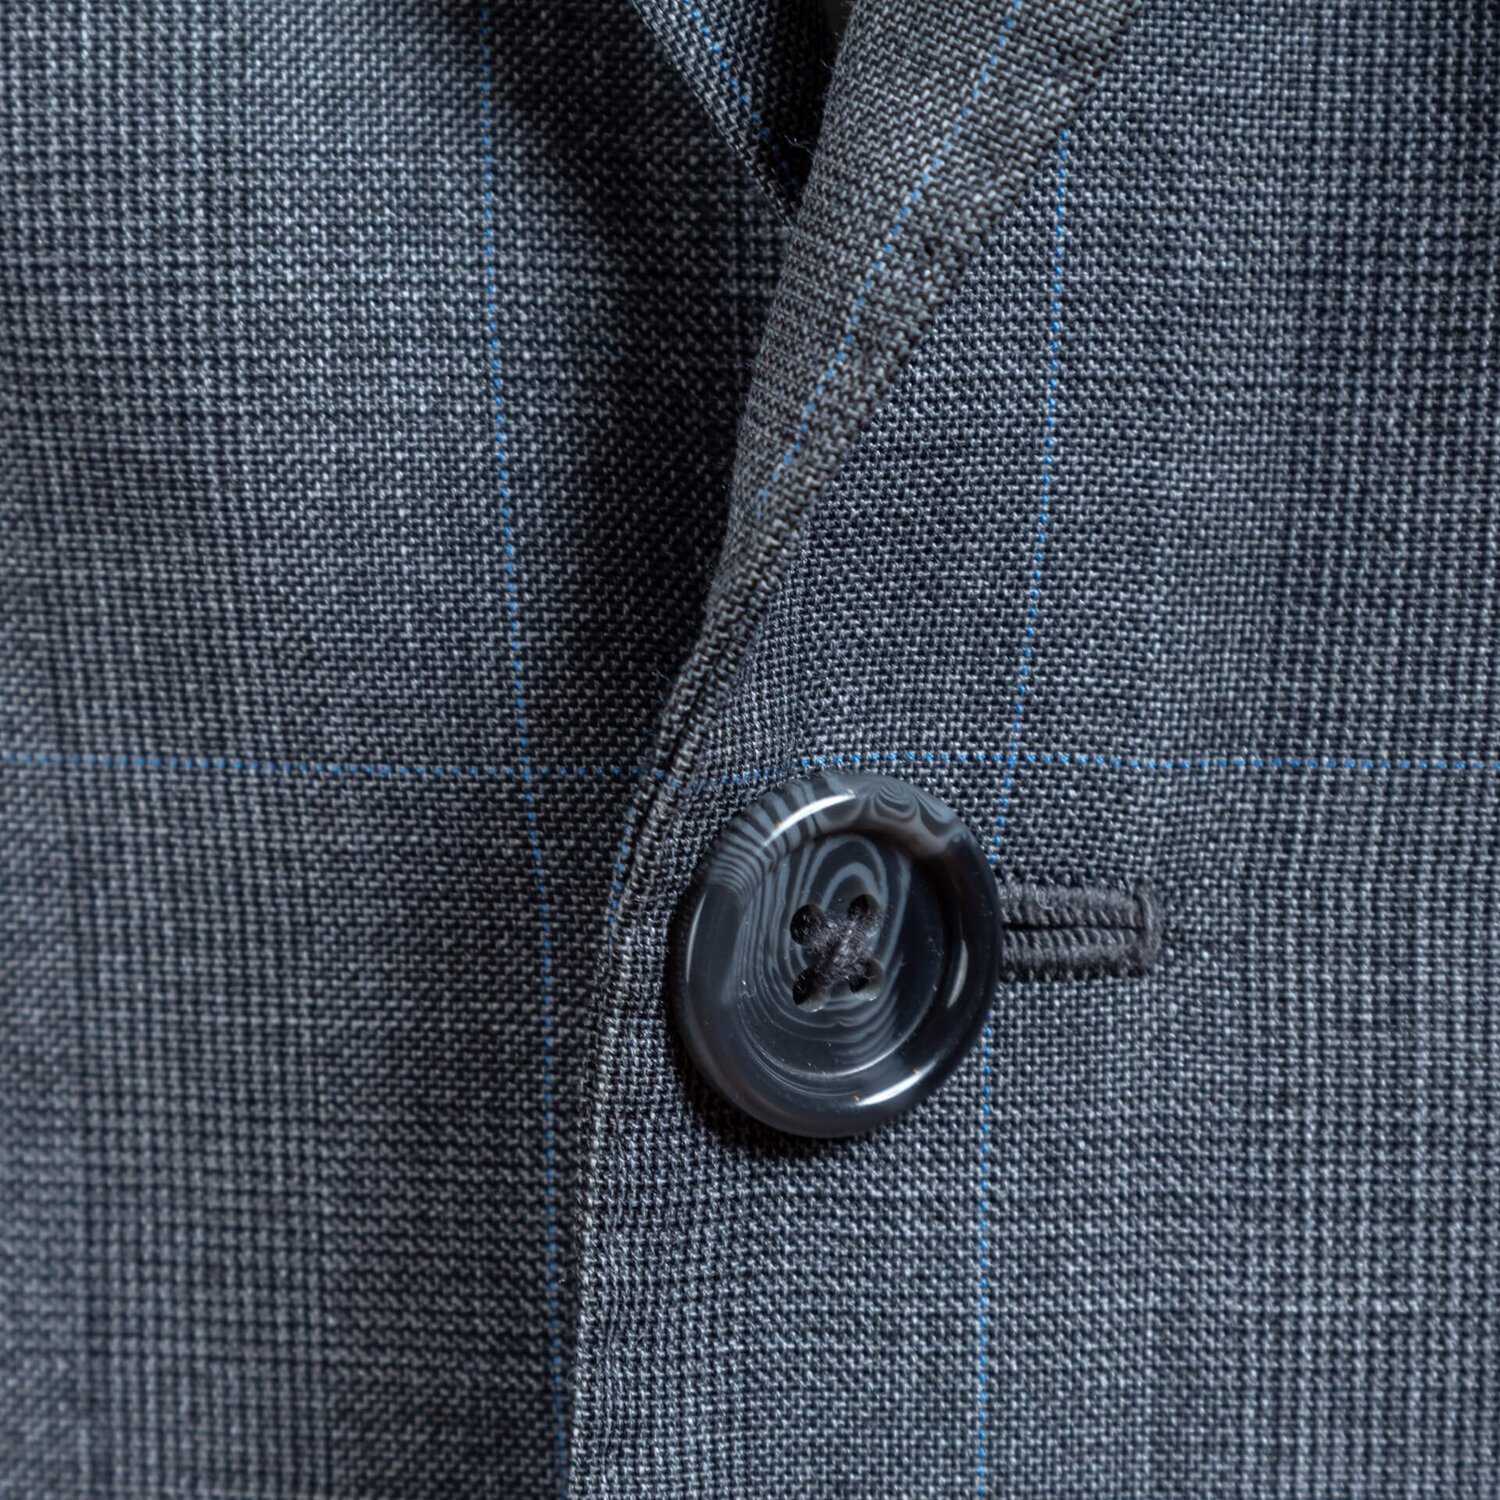 How To Button Your Suits, Jackets, Vests, Overcoats, & Tuxedo